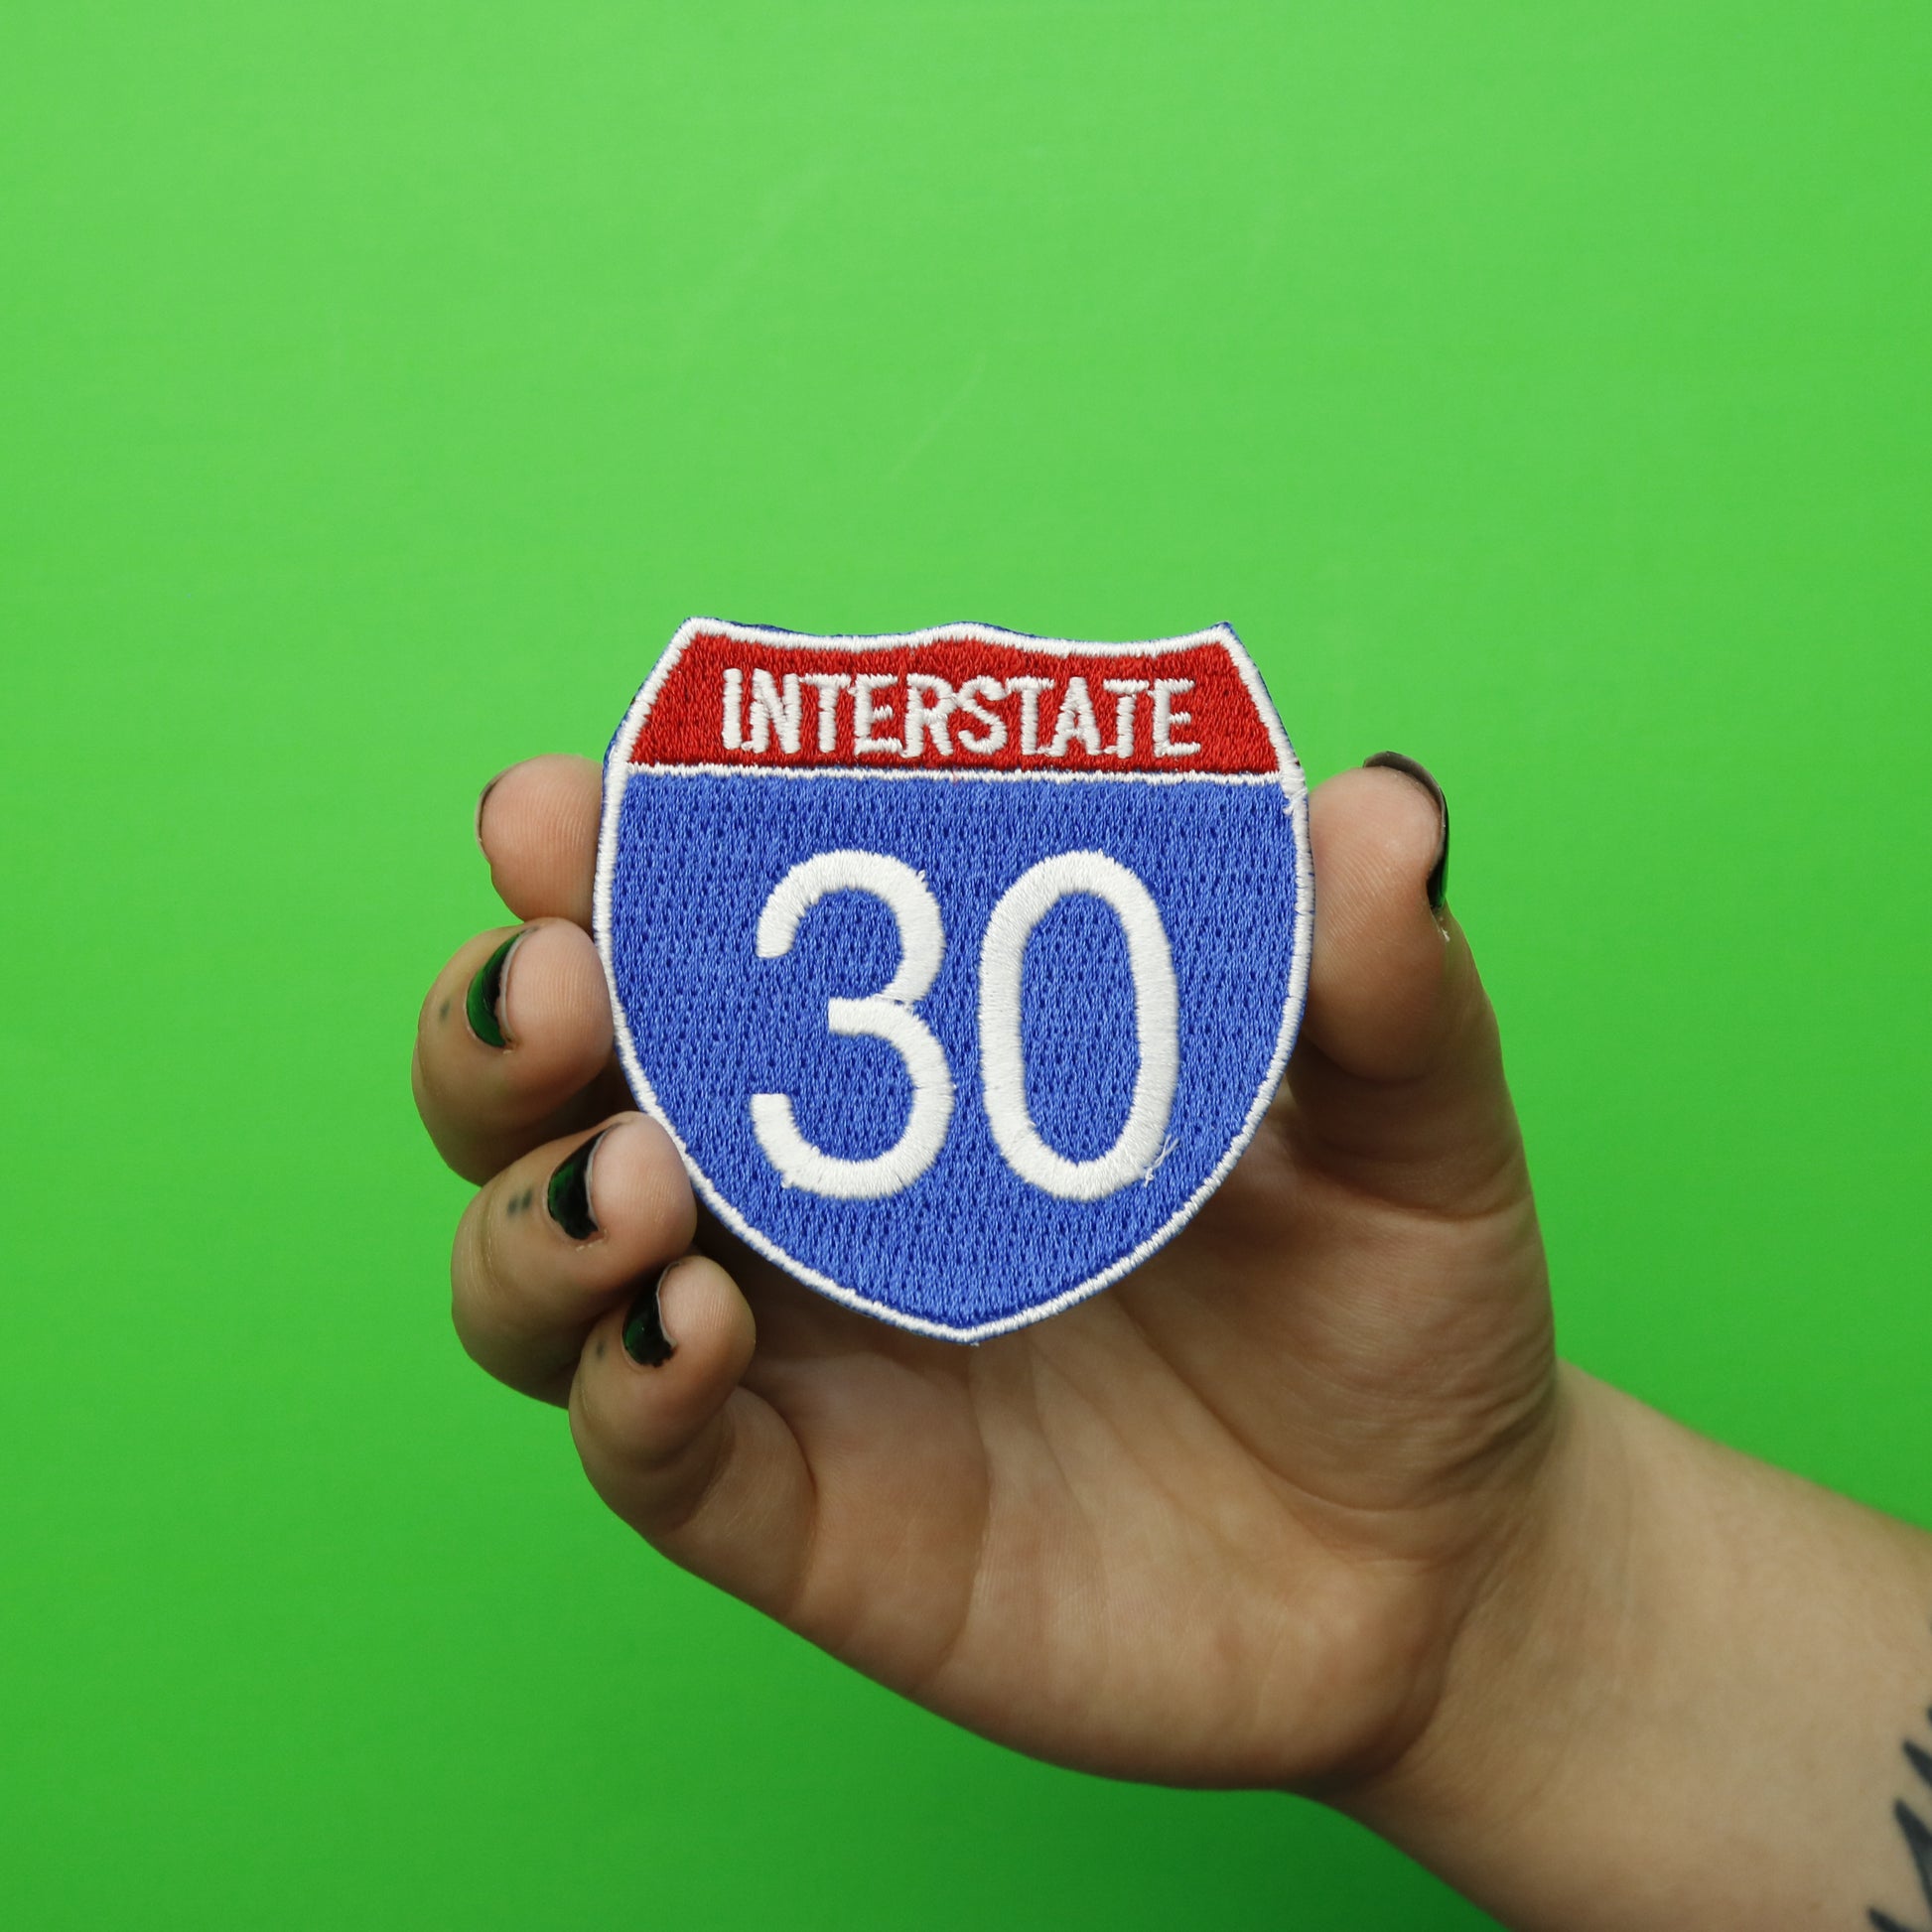 Interstate 30 I-30 Freeway Sign Embroidered Iron On Patch 